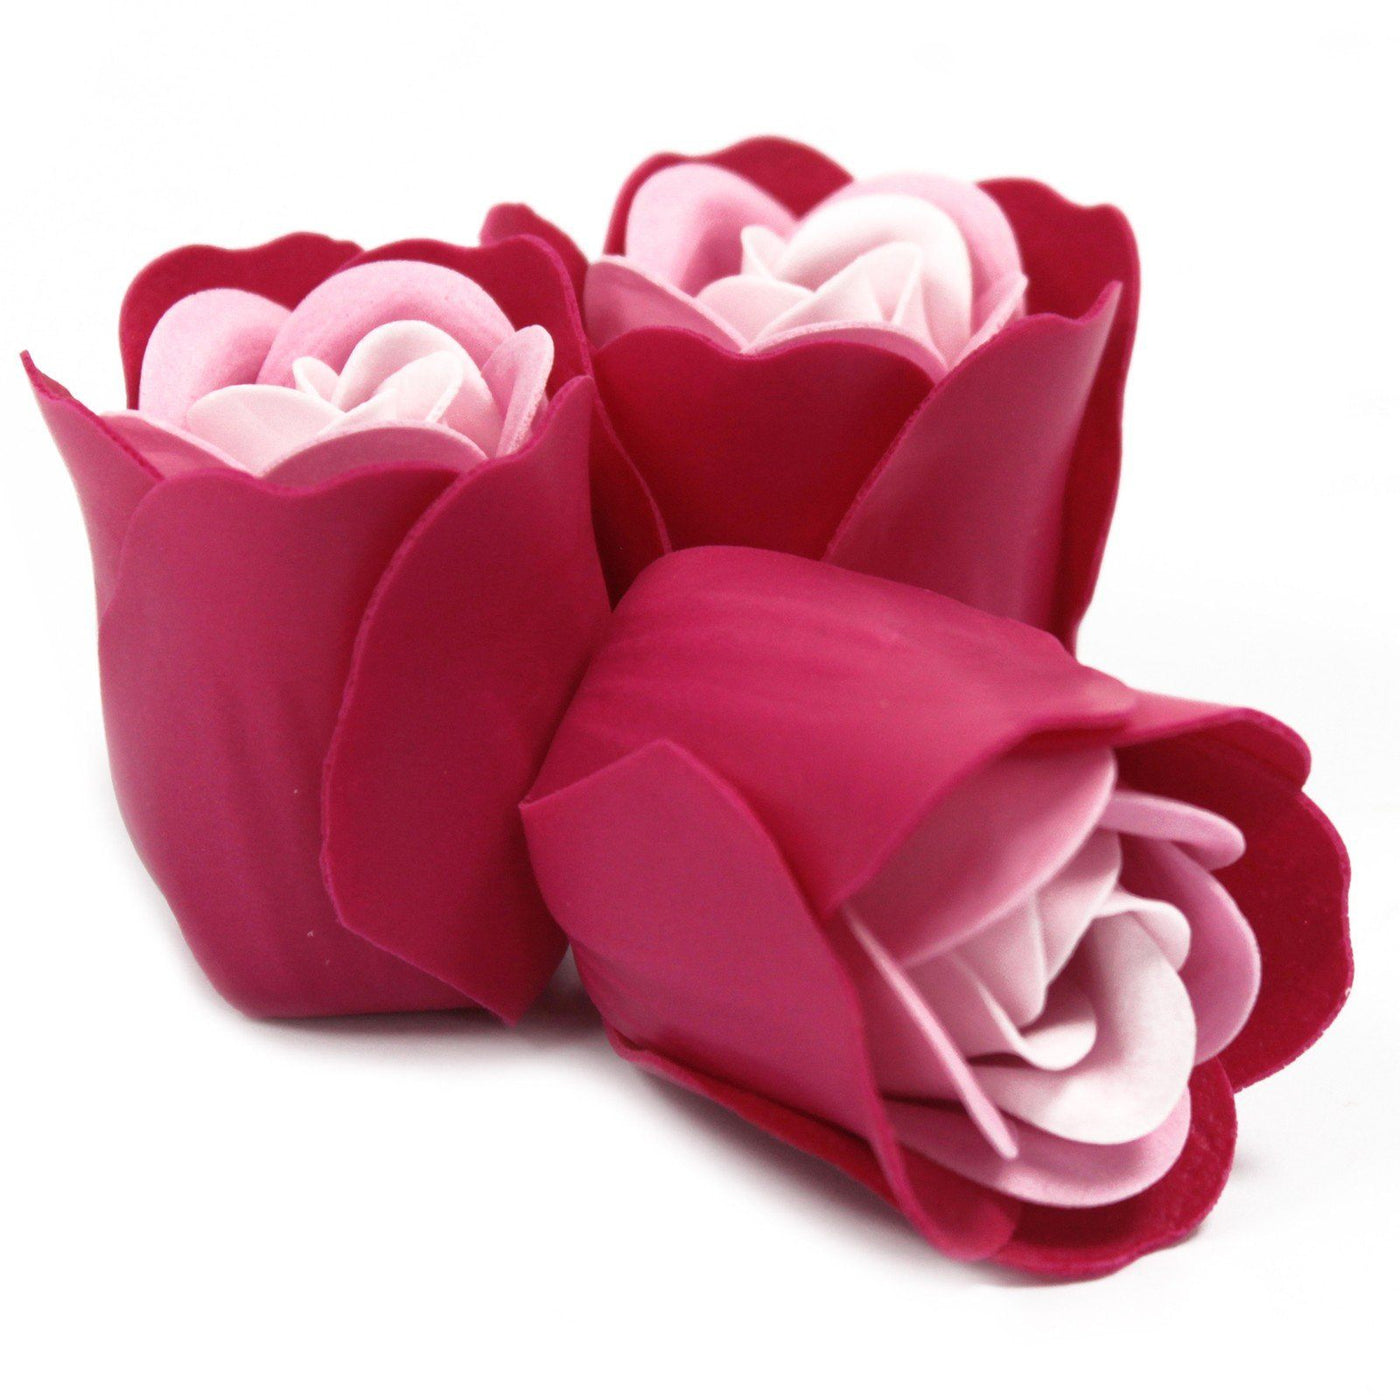 Set of 3 Bath Soap Pink Roses Flowers In Heart Gift Box.